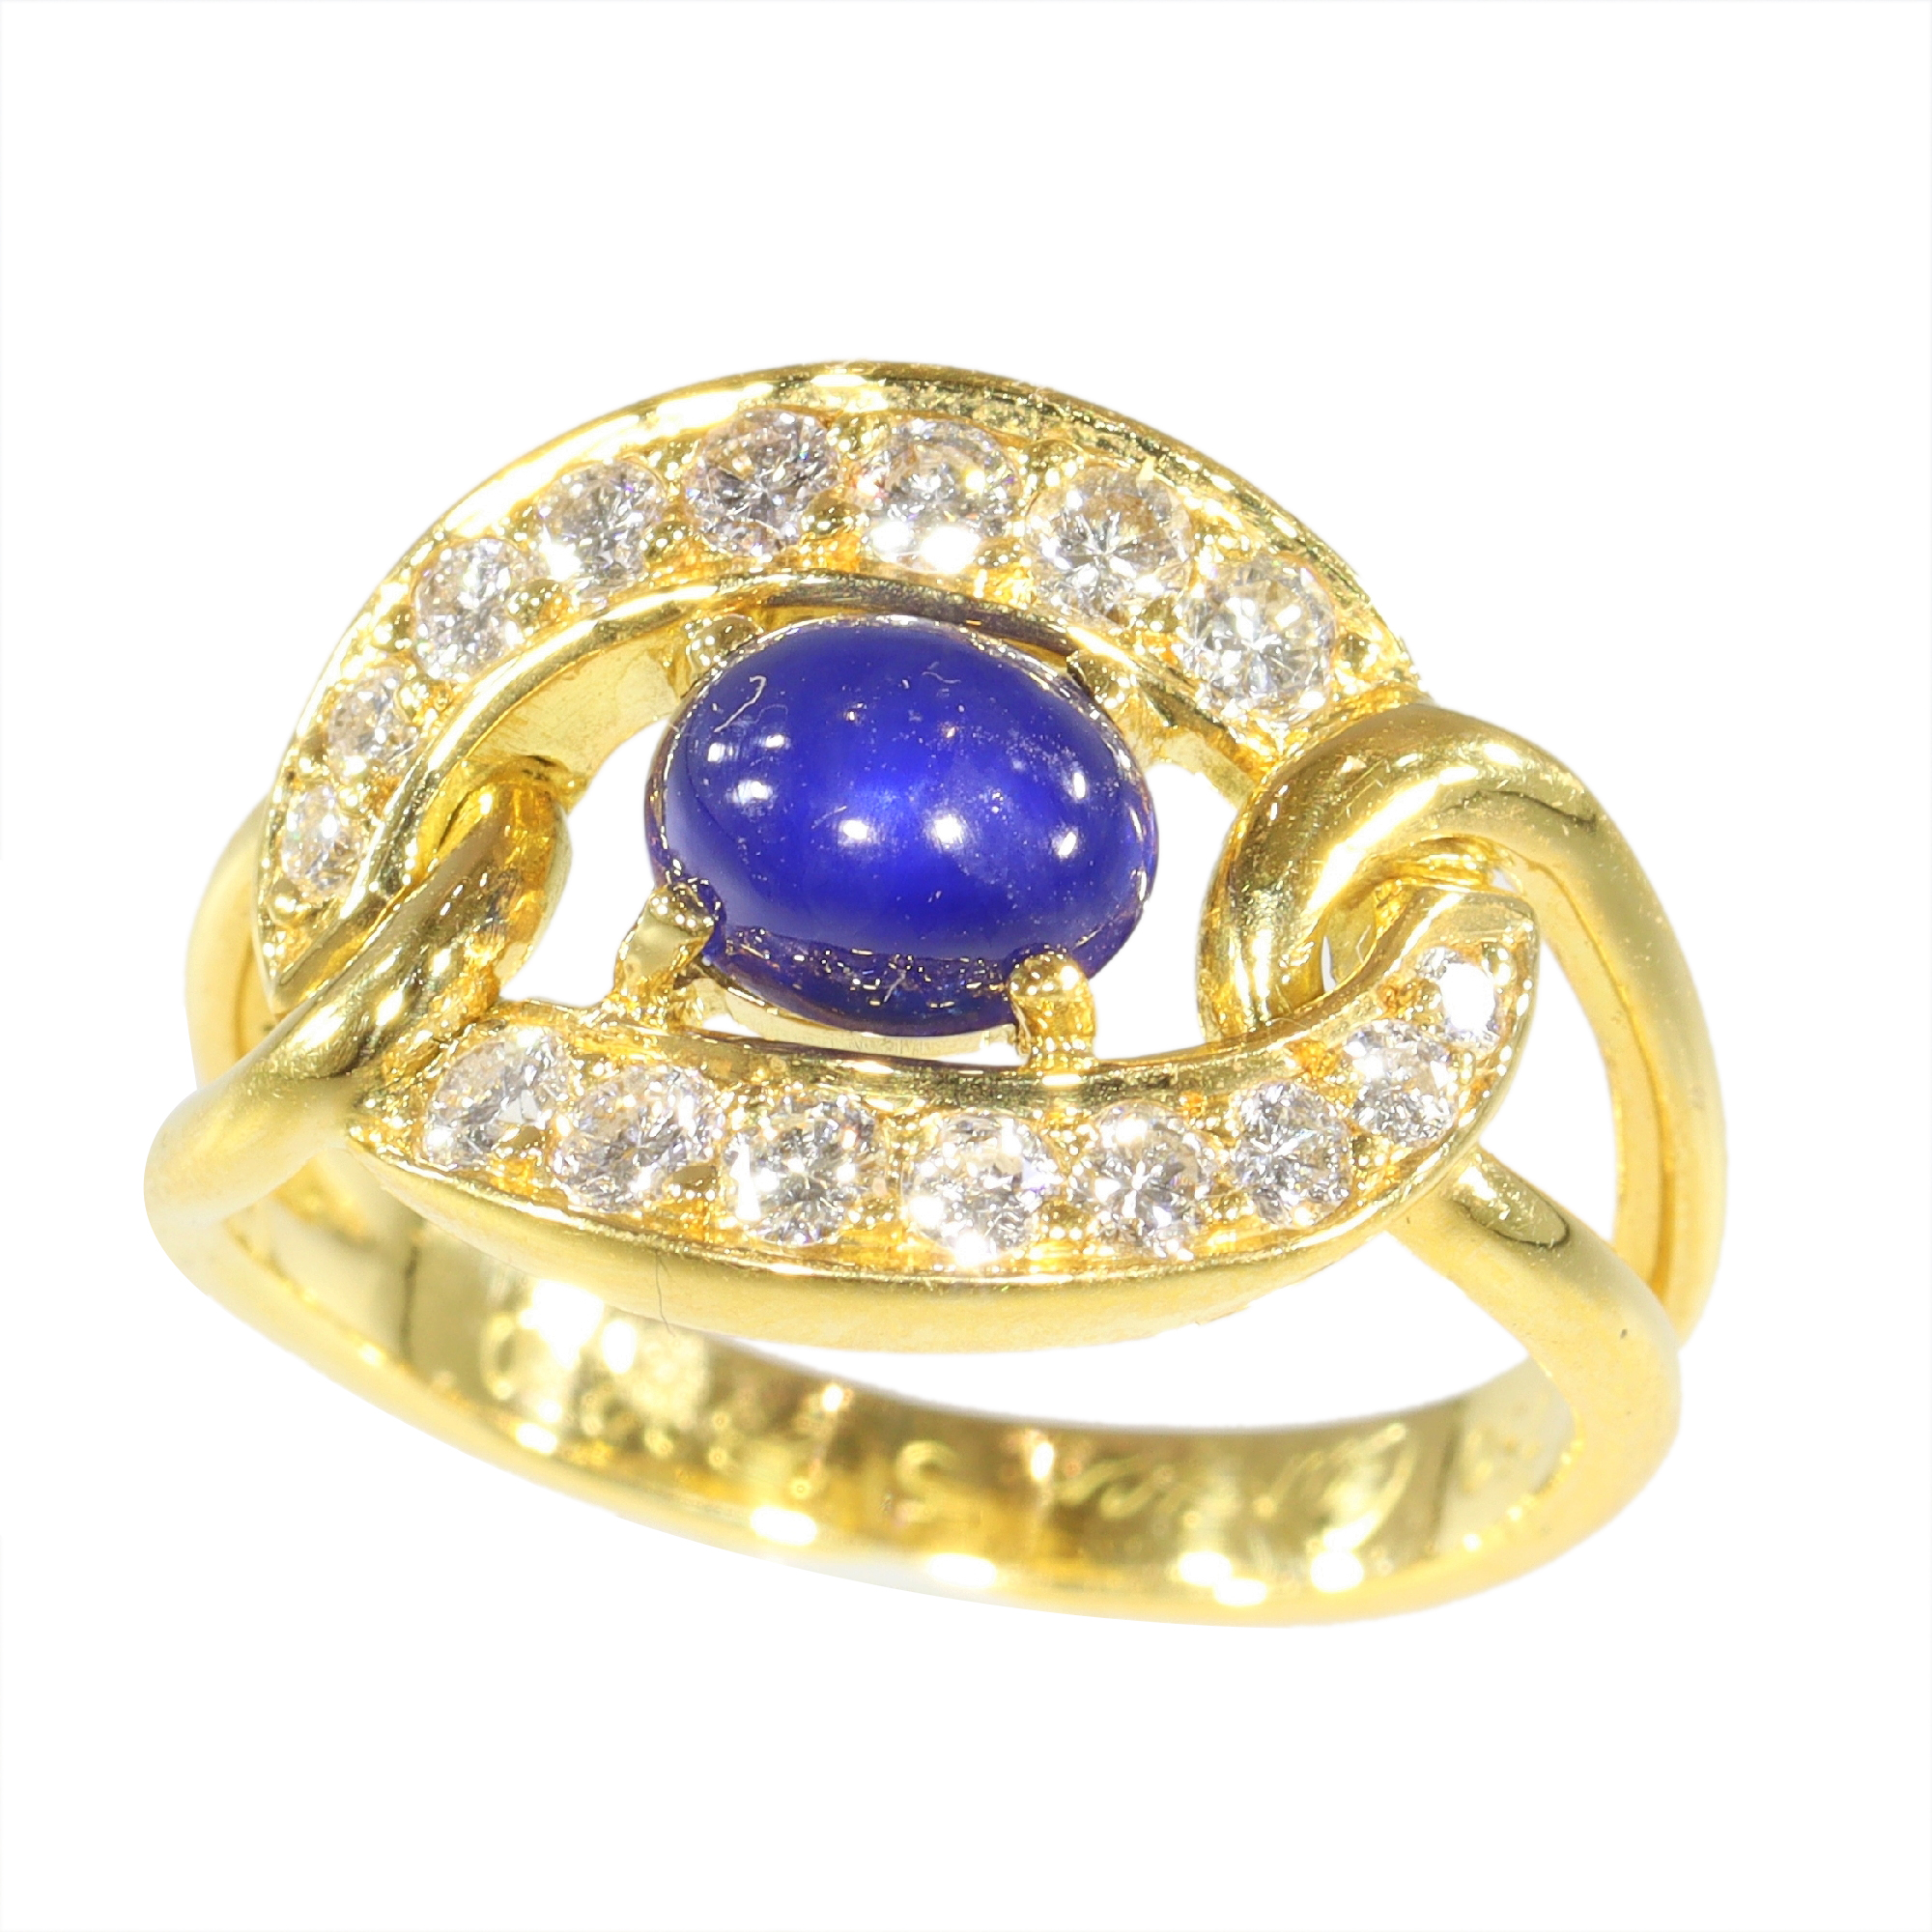 Vintage luxury CARTIER ring with sapphire and diamonds